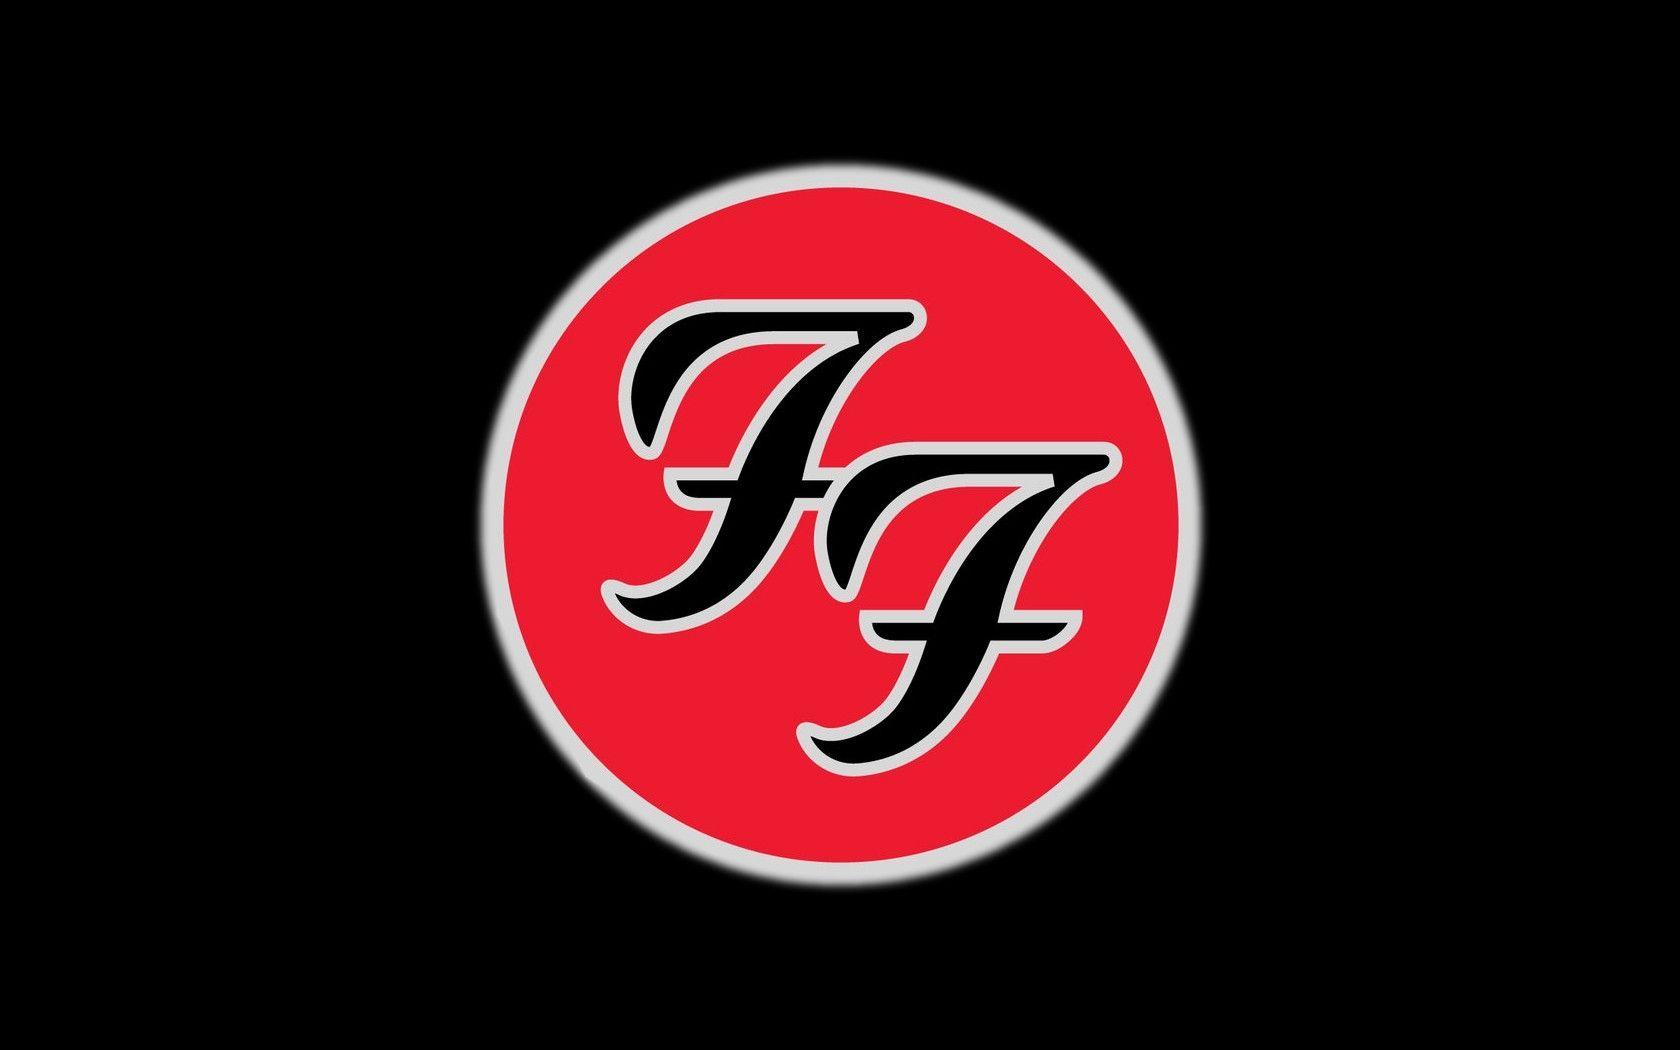 Foo Fighters Logo - Wallpaper : red, text, logo, sign, circle, brand, Foo Fighters, icon ...